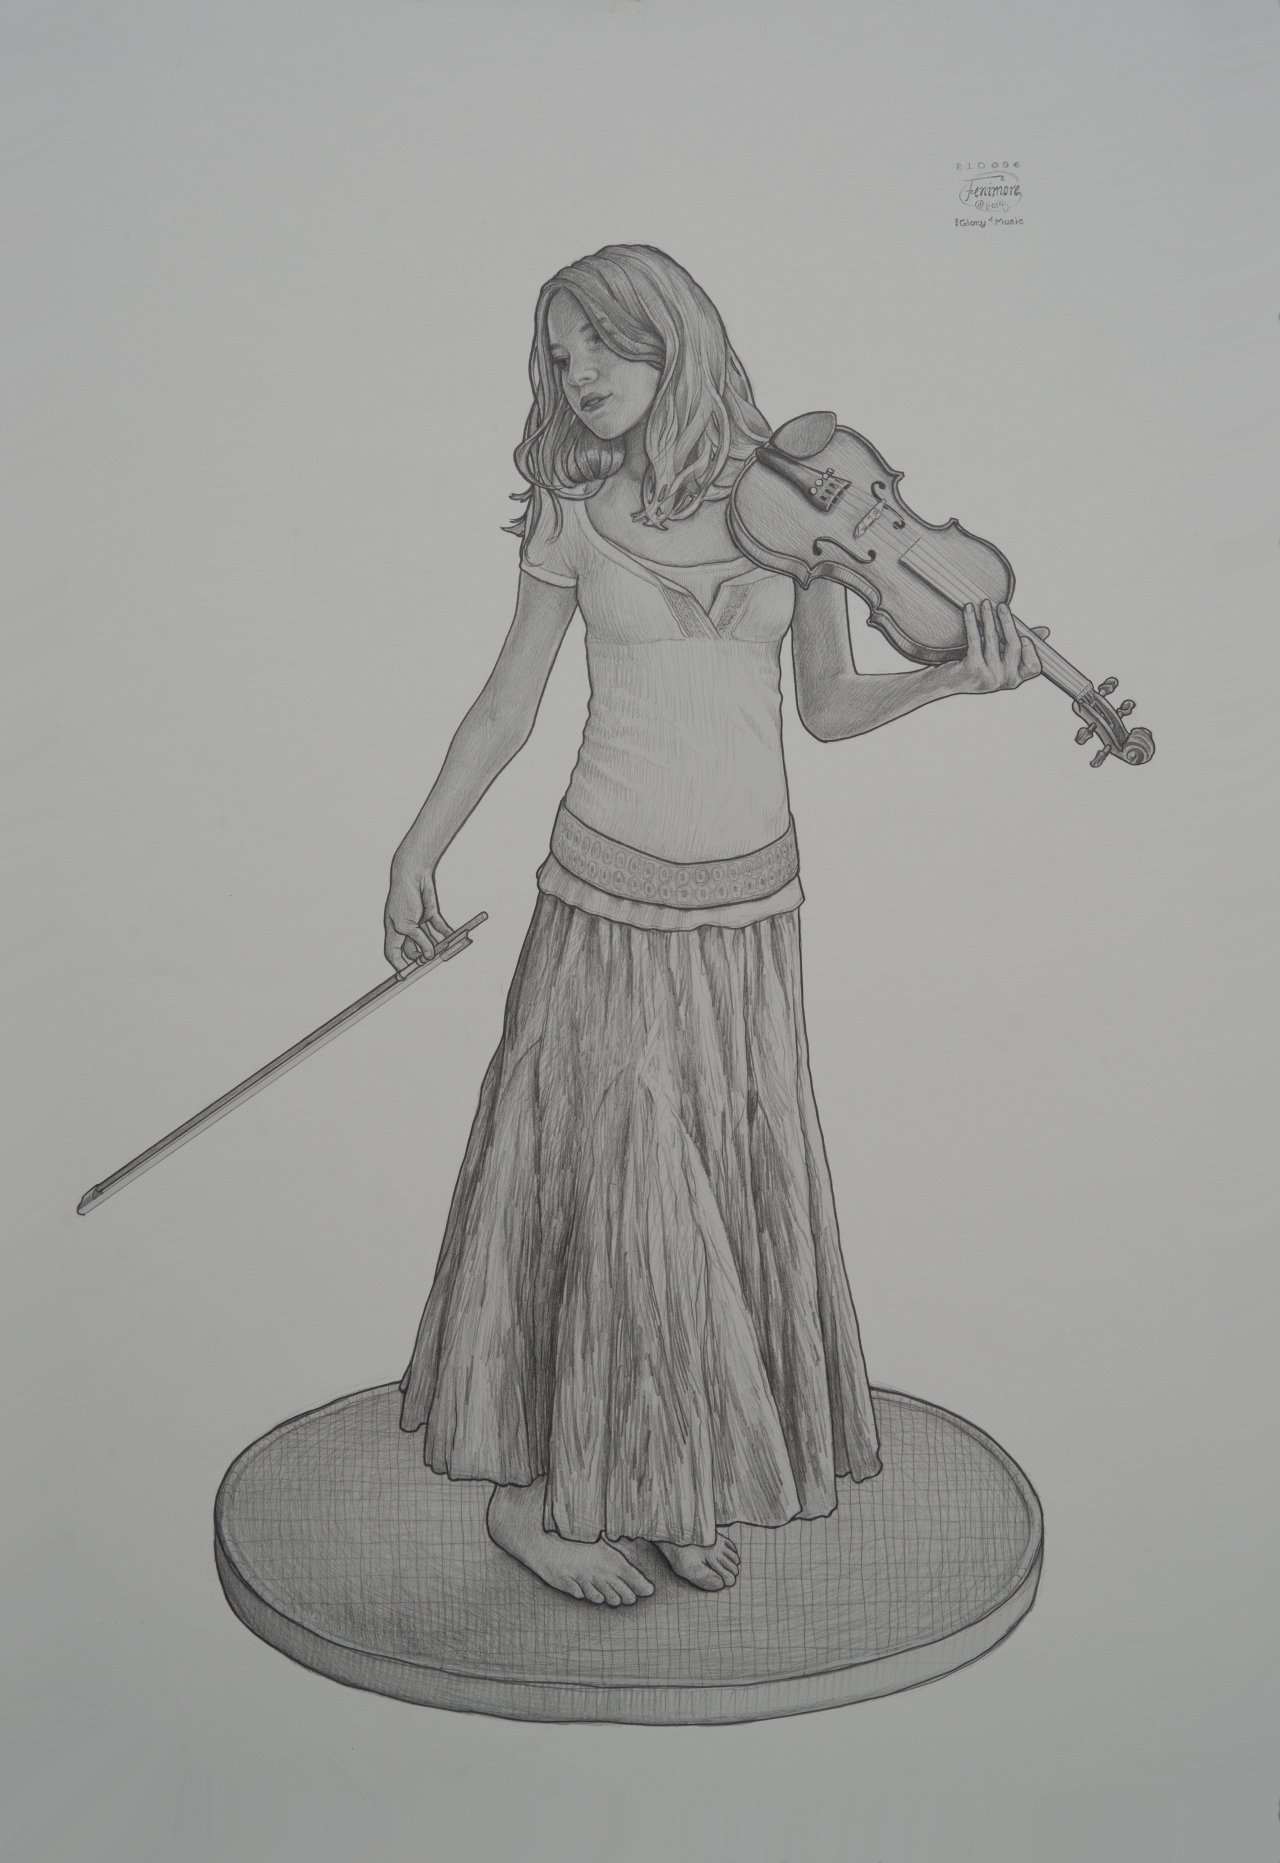 The first sketch in the Violinist series. I'd hoped to make them their own set, but couldn't wait to get started